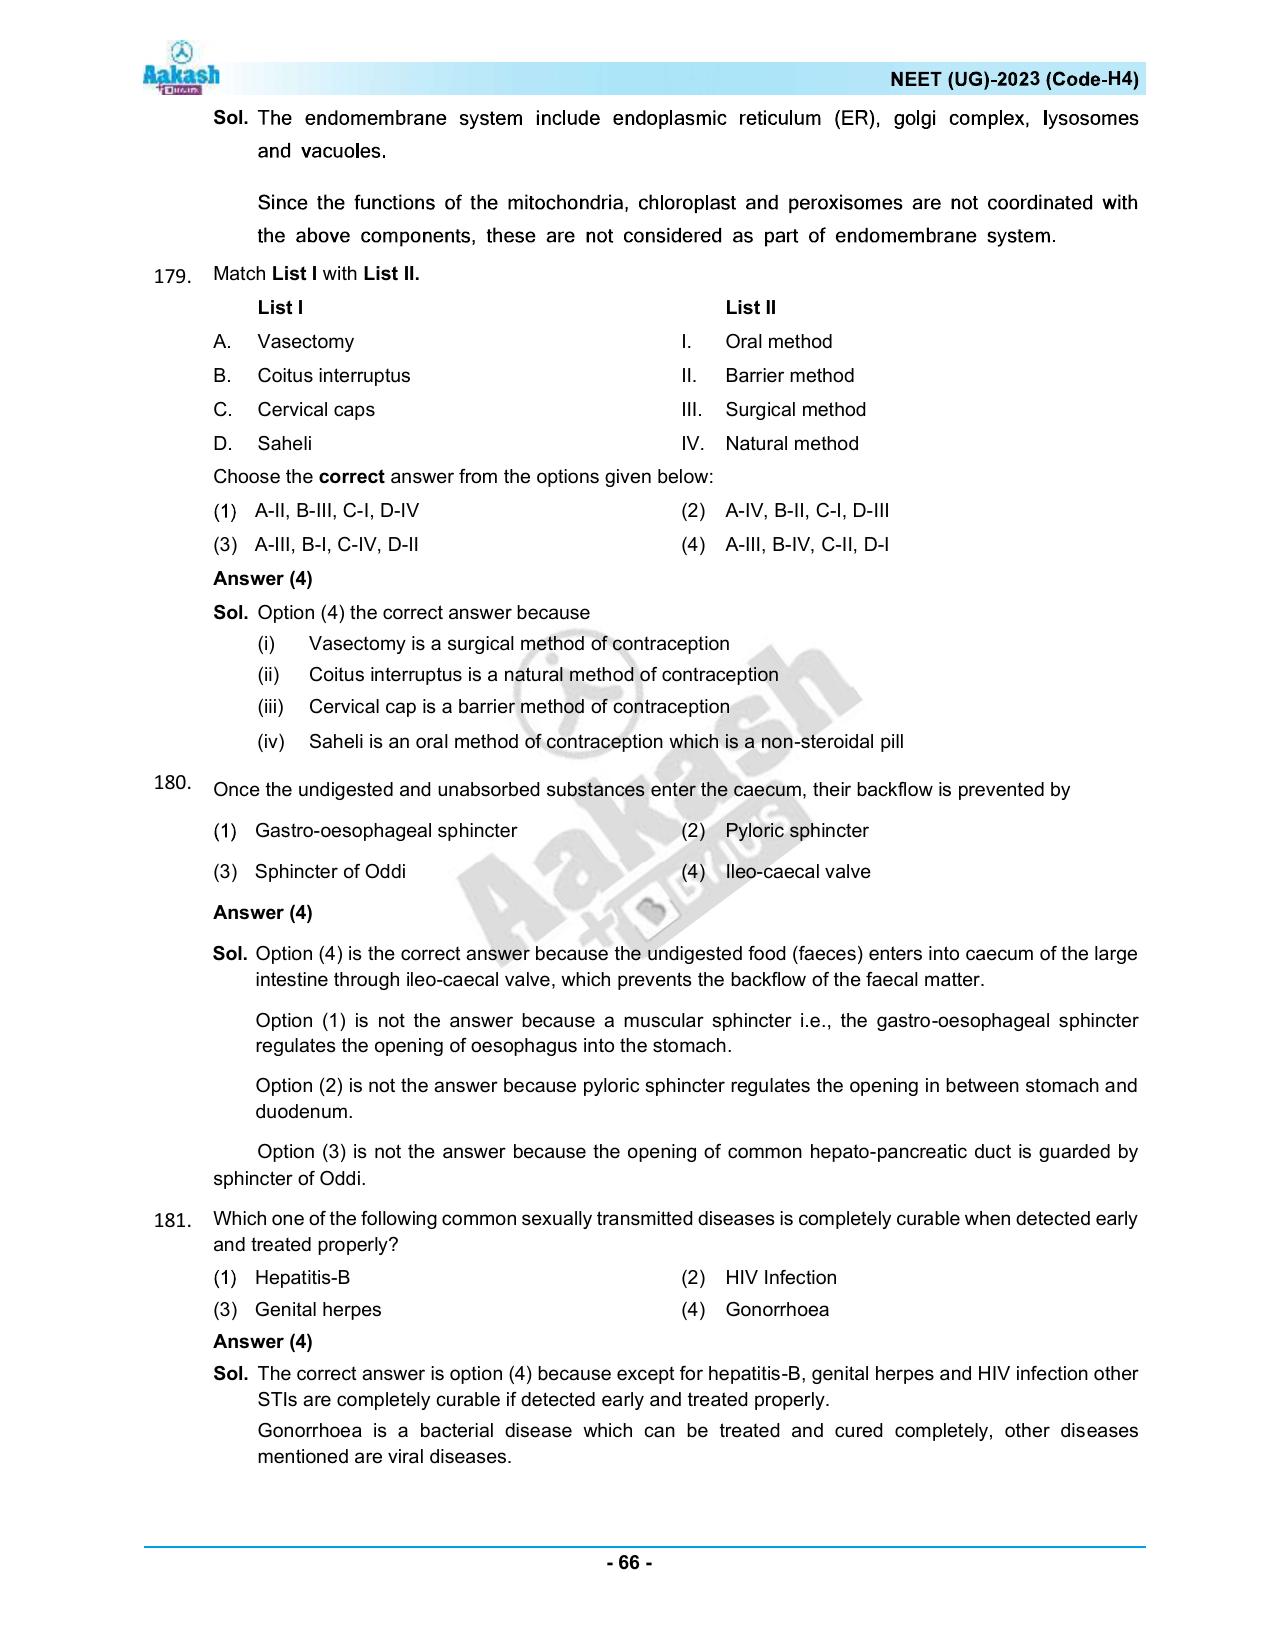 NEET 2023 Question Paper H4 - Page 66